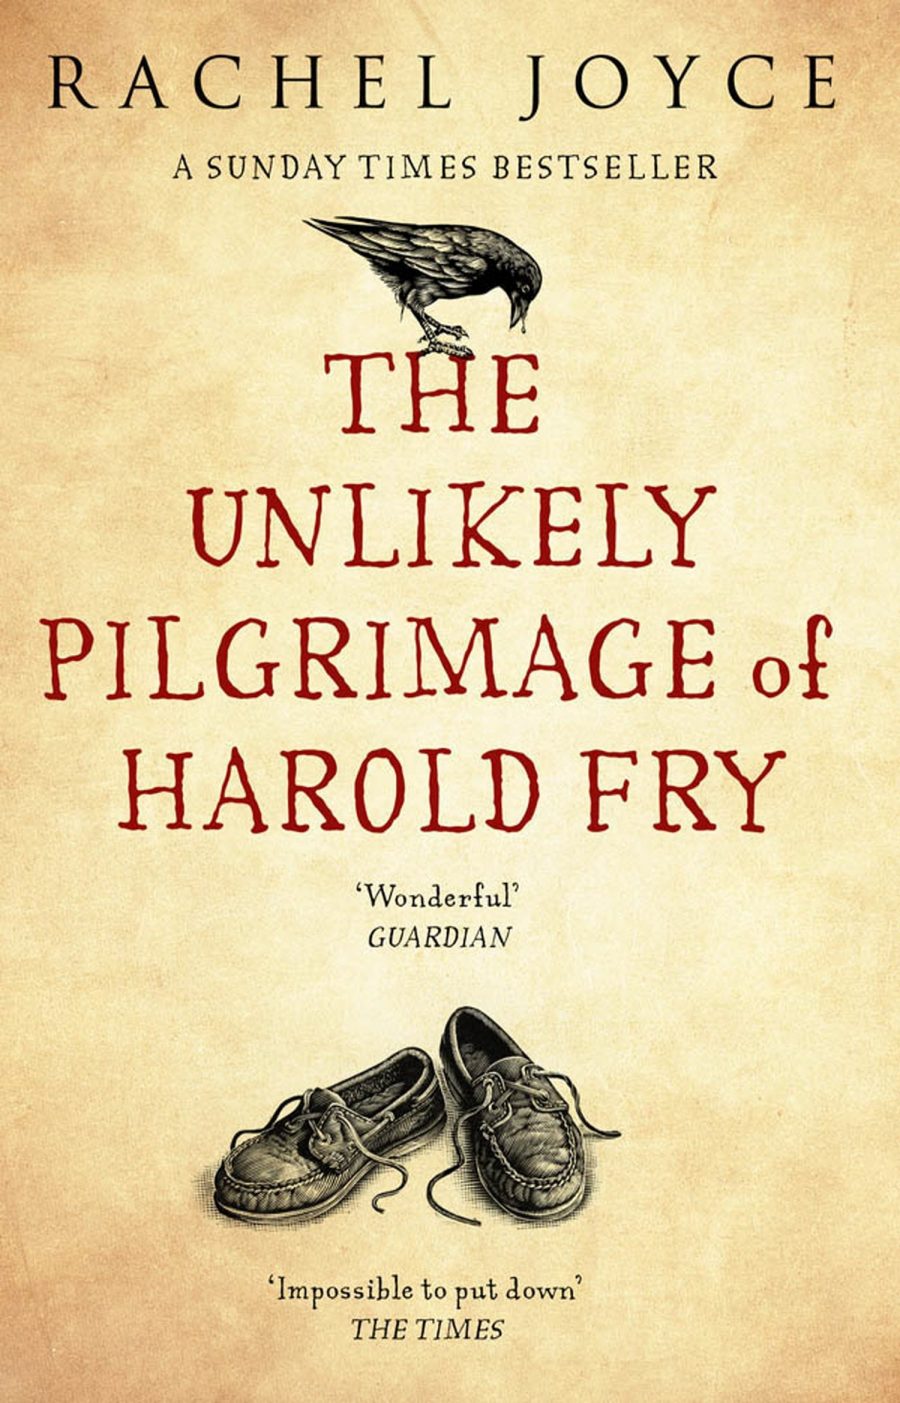 sequel to the unlikely pilgrimage of harold fry